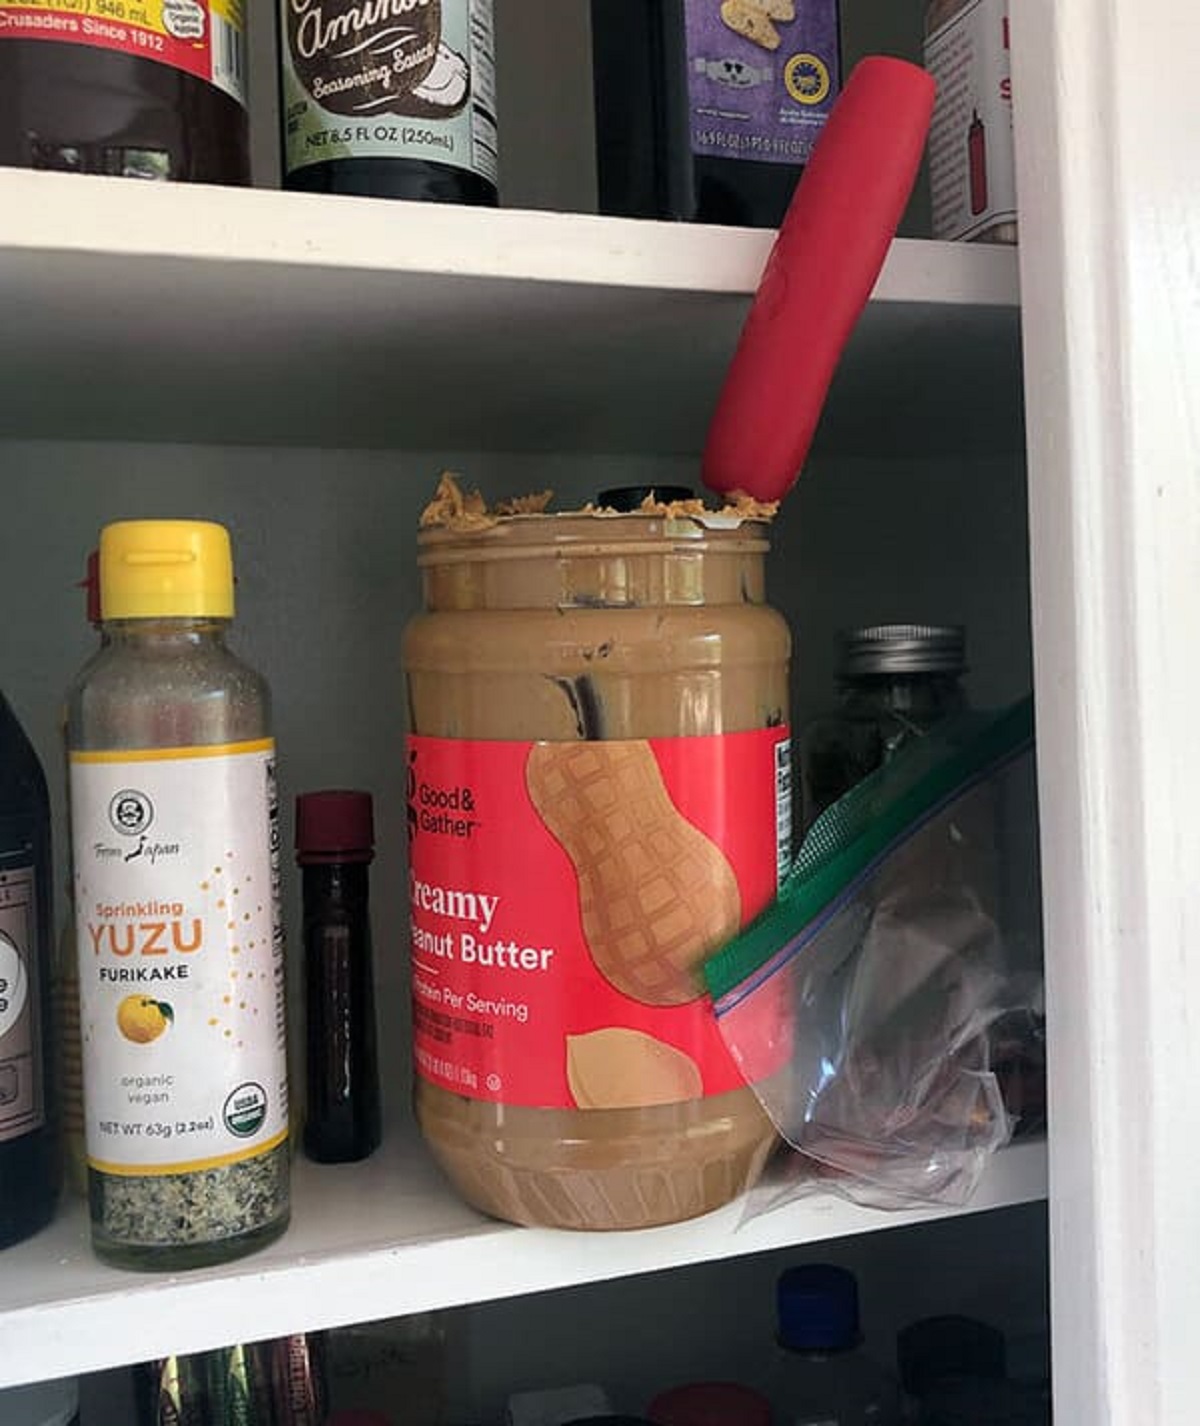 “The Way My Fiance Leaves Peanut Butter”